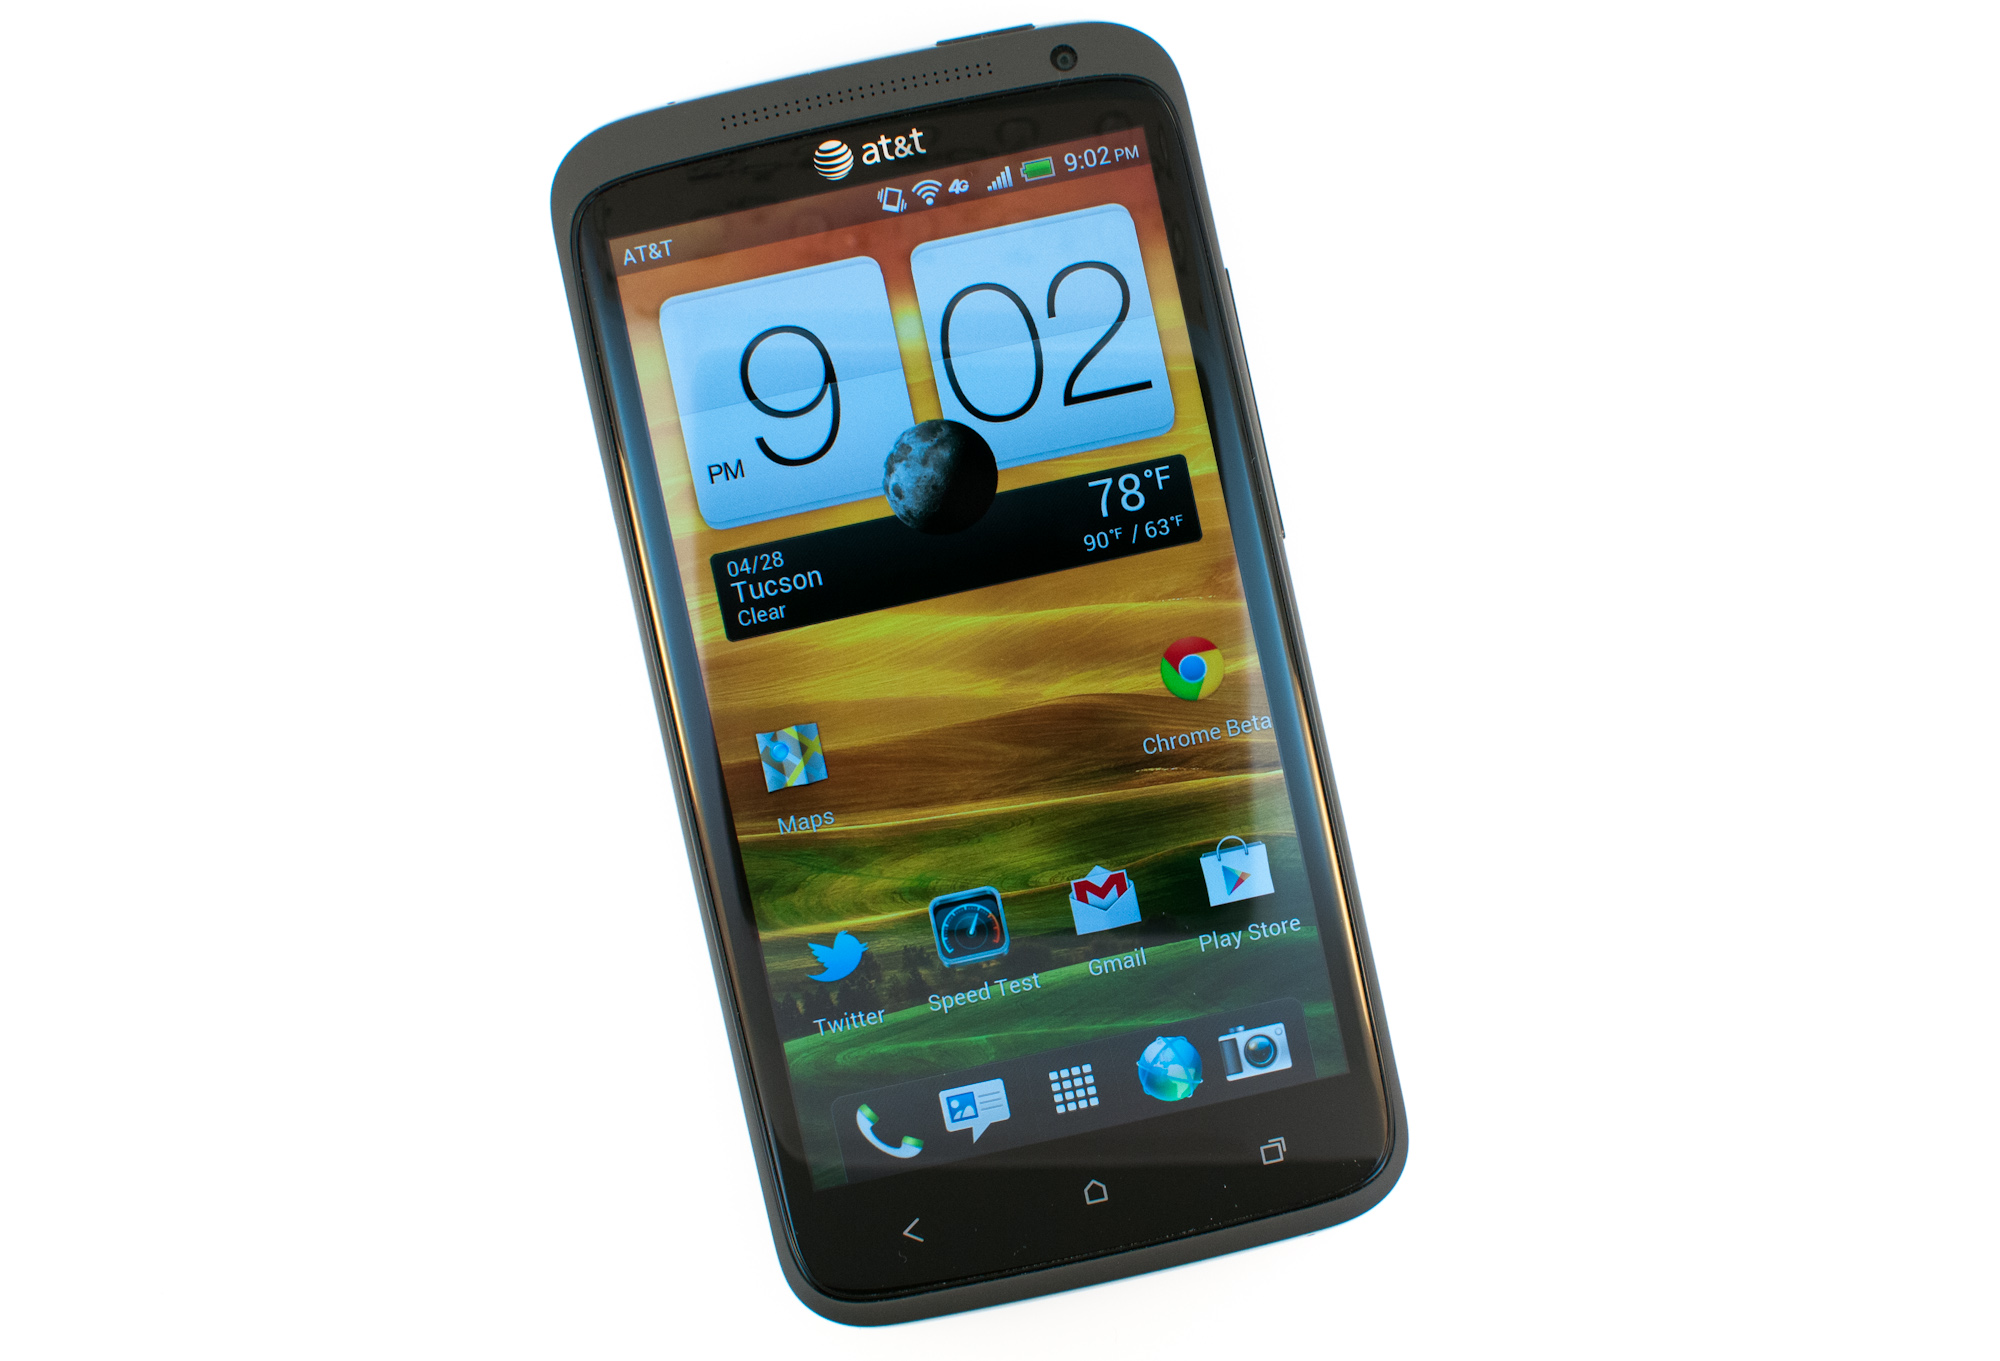 Technonica Tk The Htc One X For At T Review